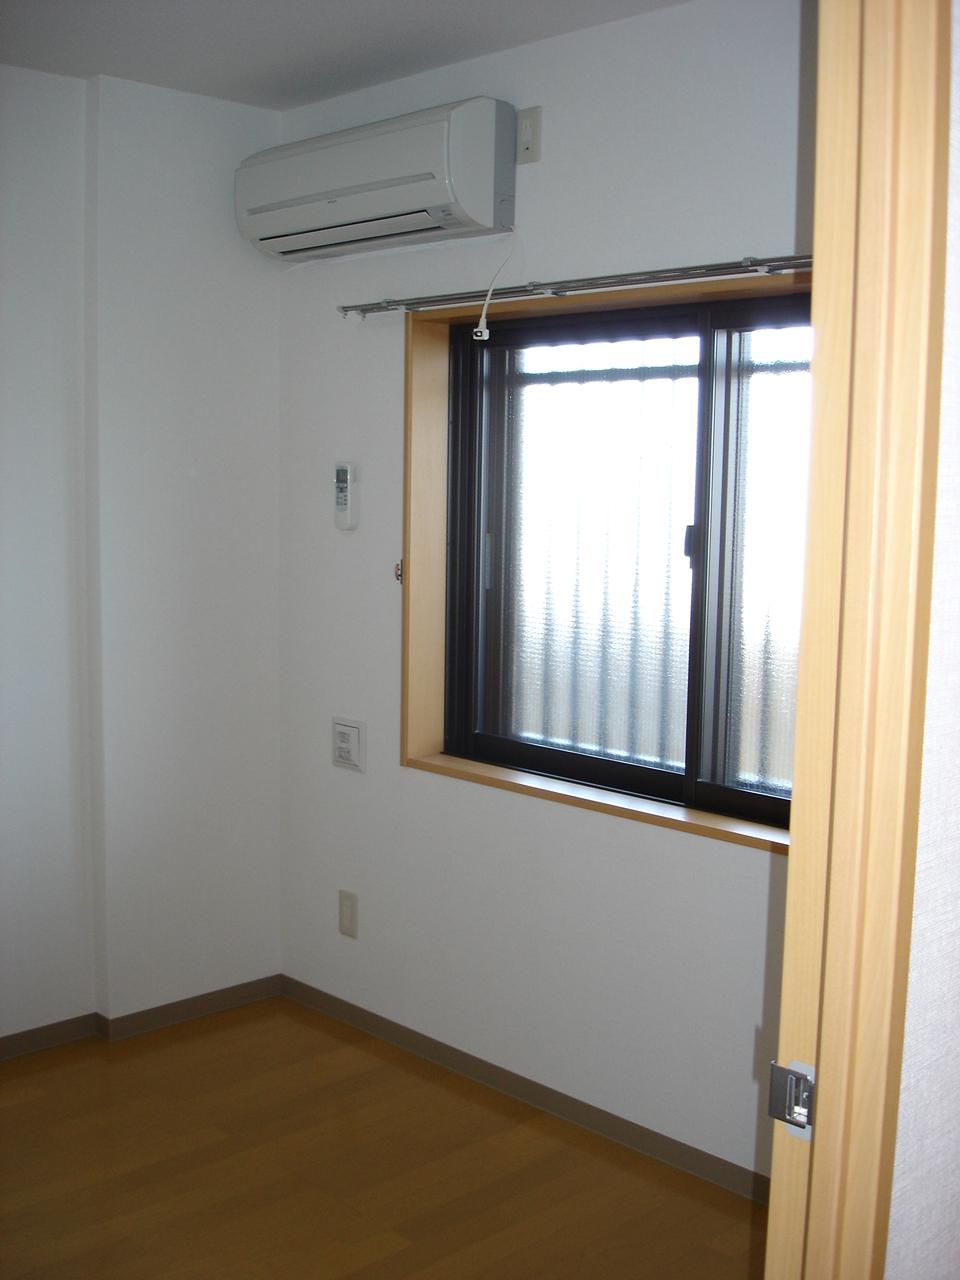 Other room space. With Western-style air-conditioned